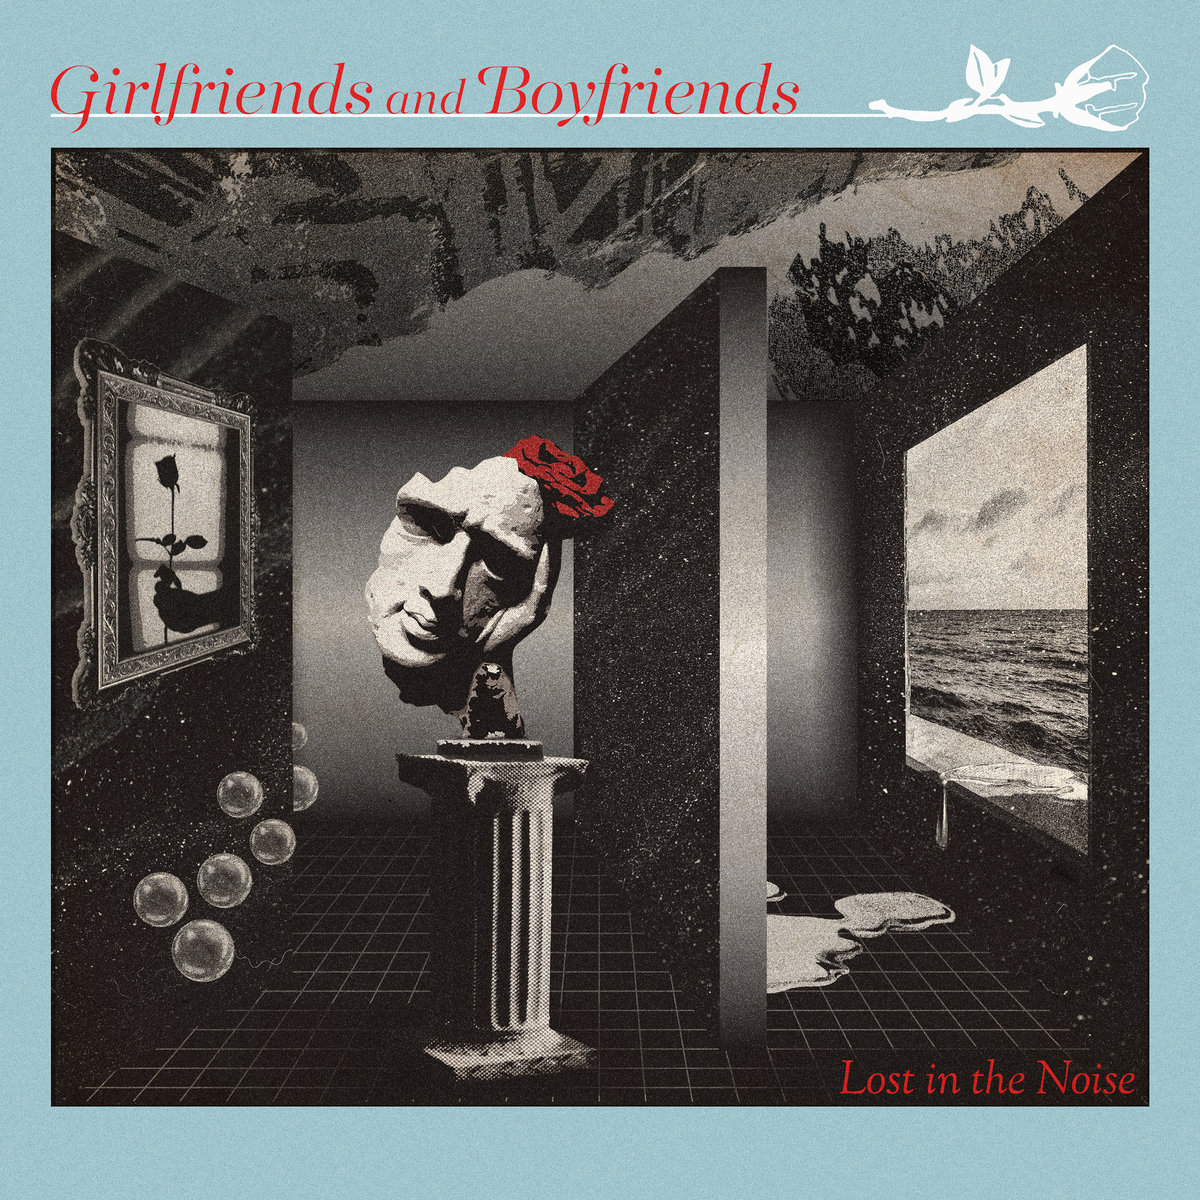 Listen Up – Girlfriends and Boyfriends – Lost In The Noise